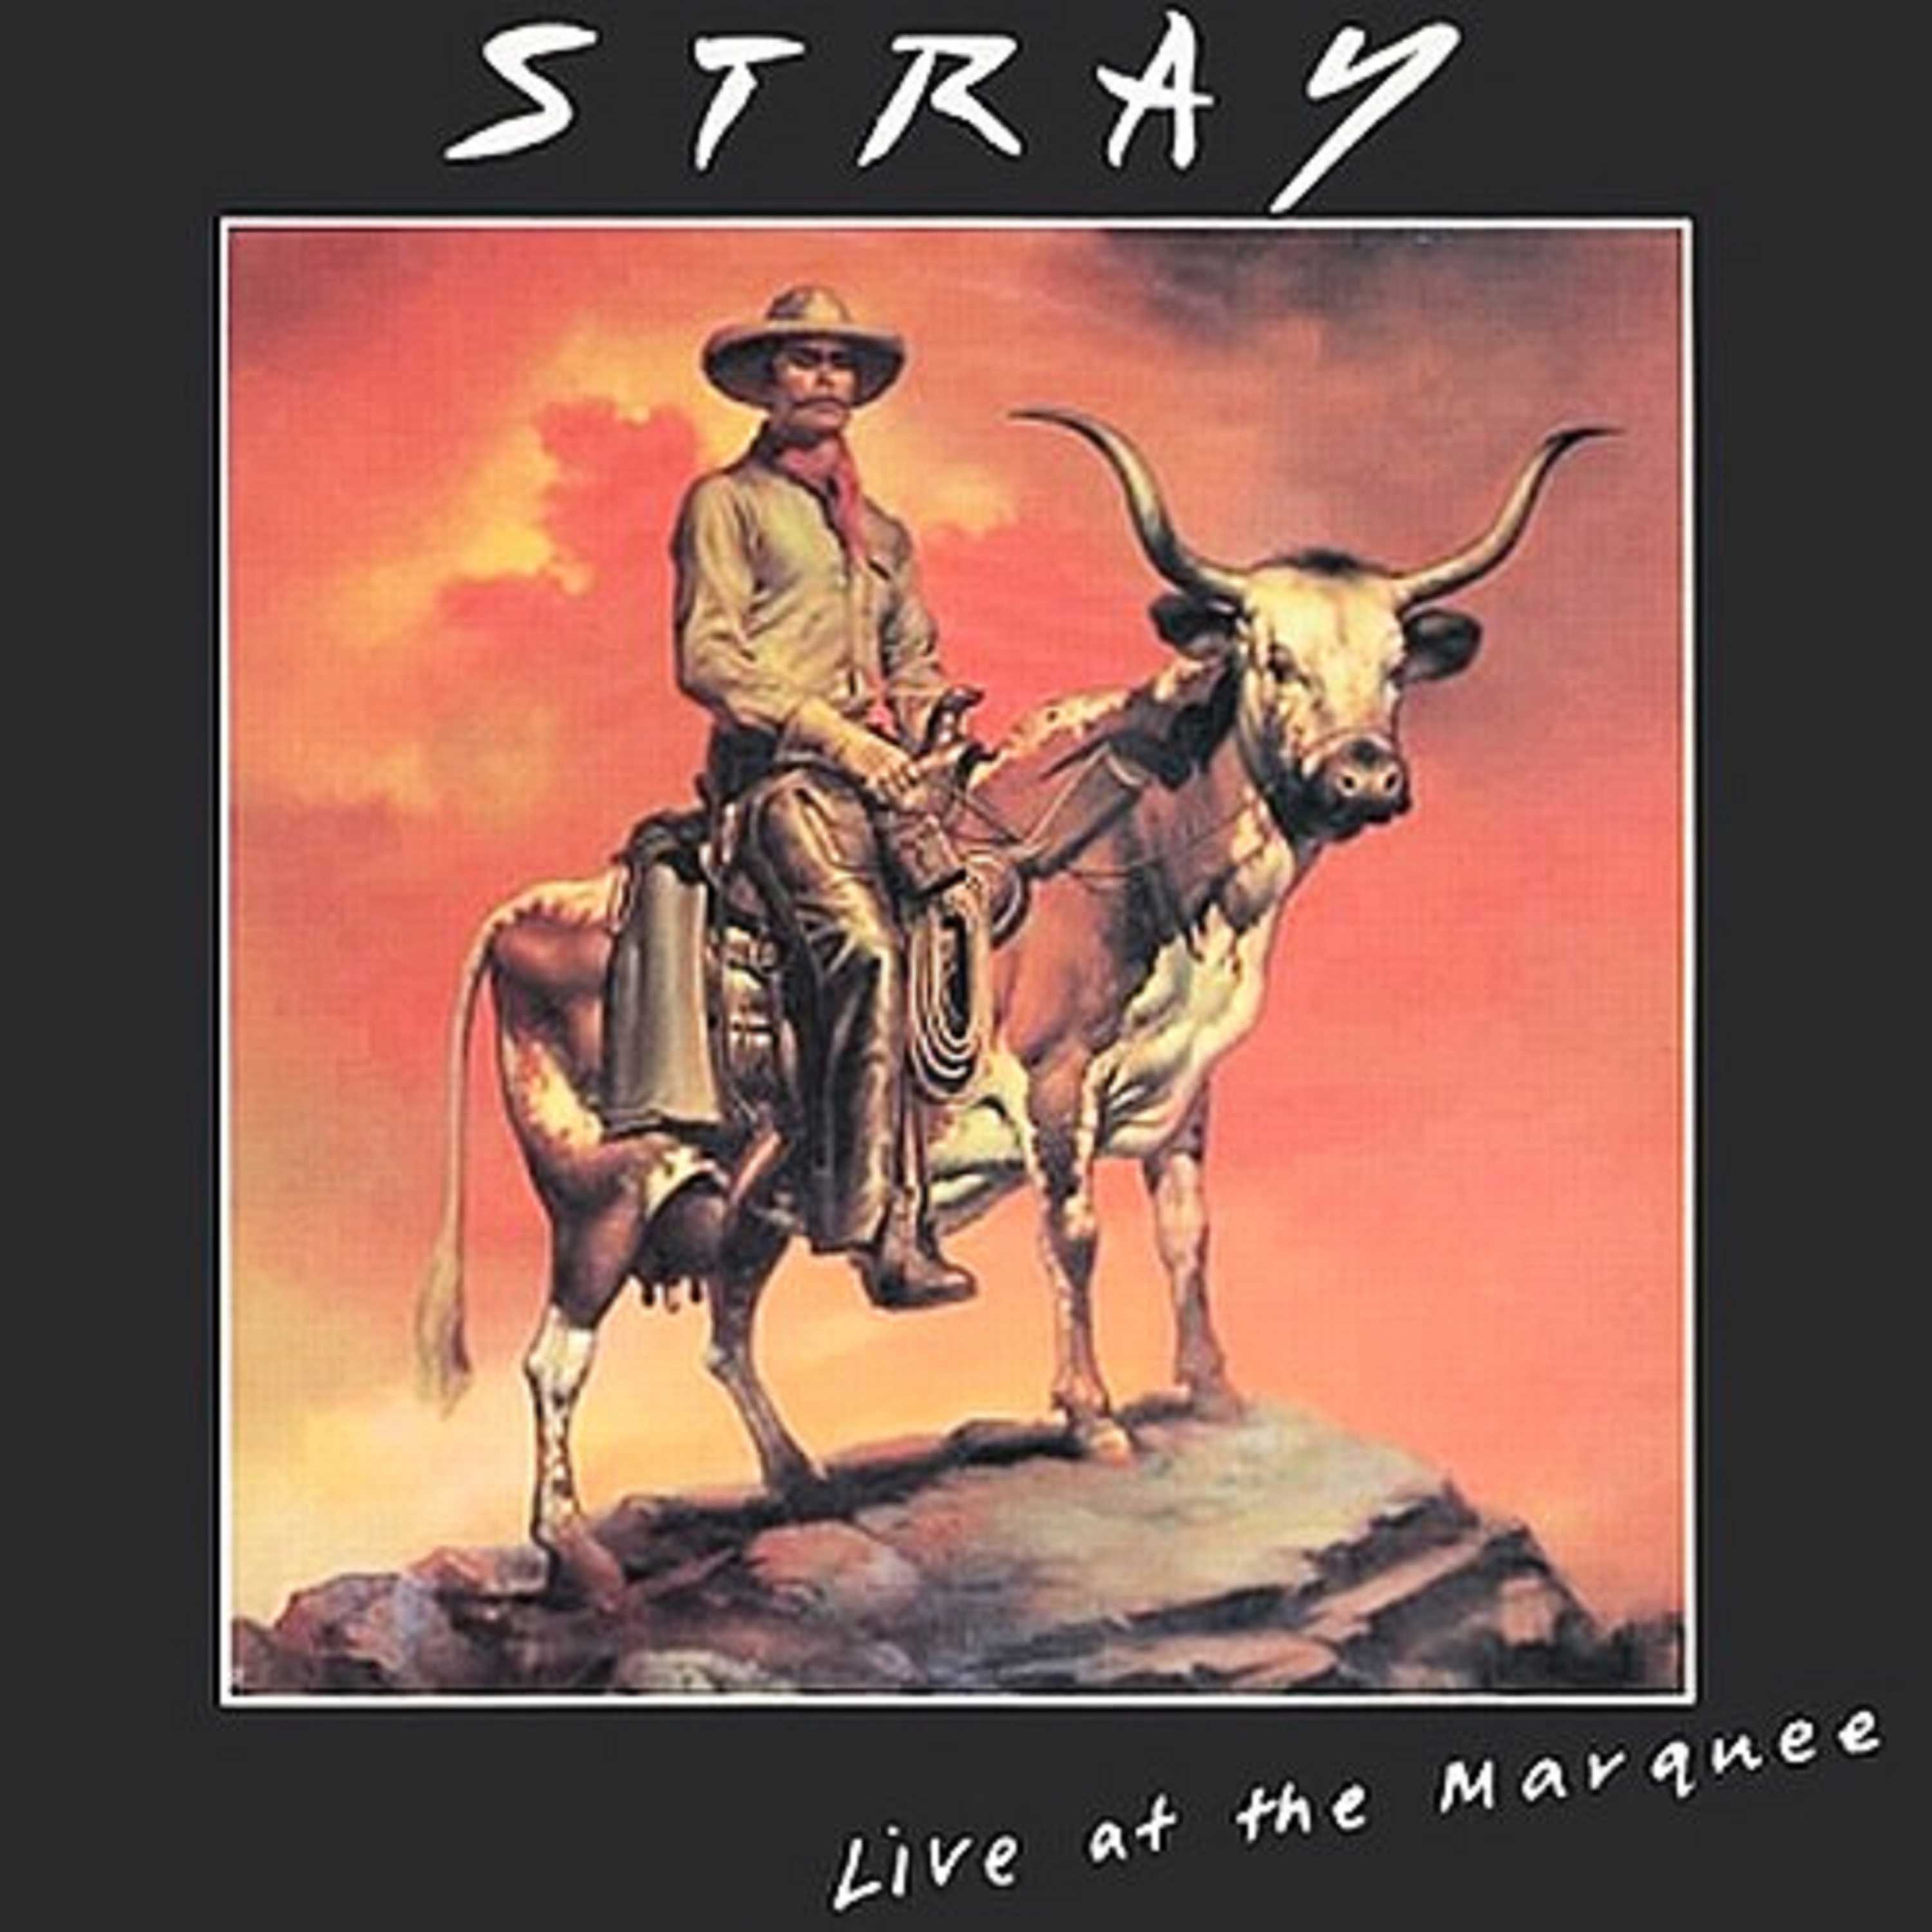 STRAY - LIVE AT THE MARQUEE(RE-MASTERED) - CD